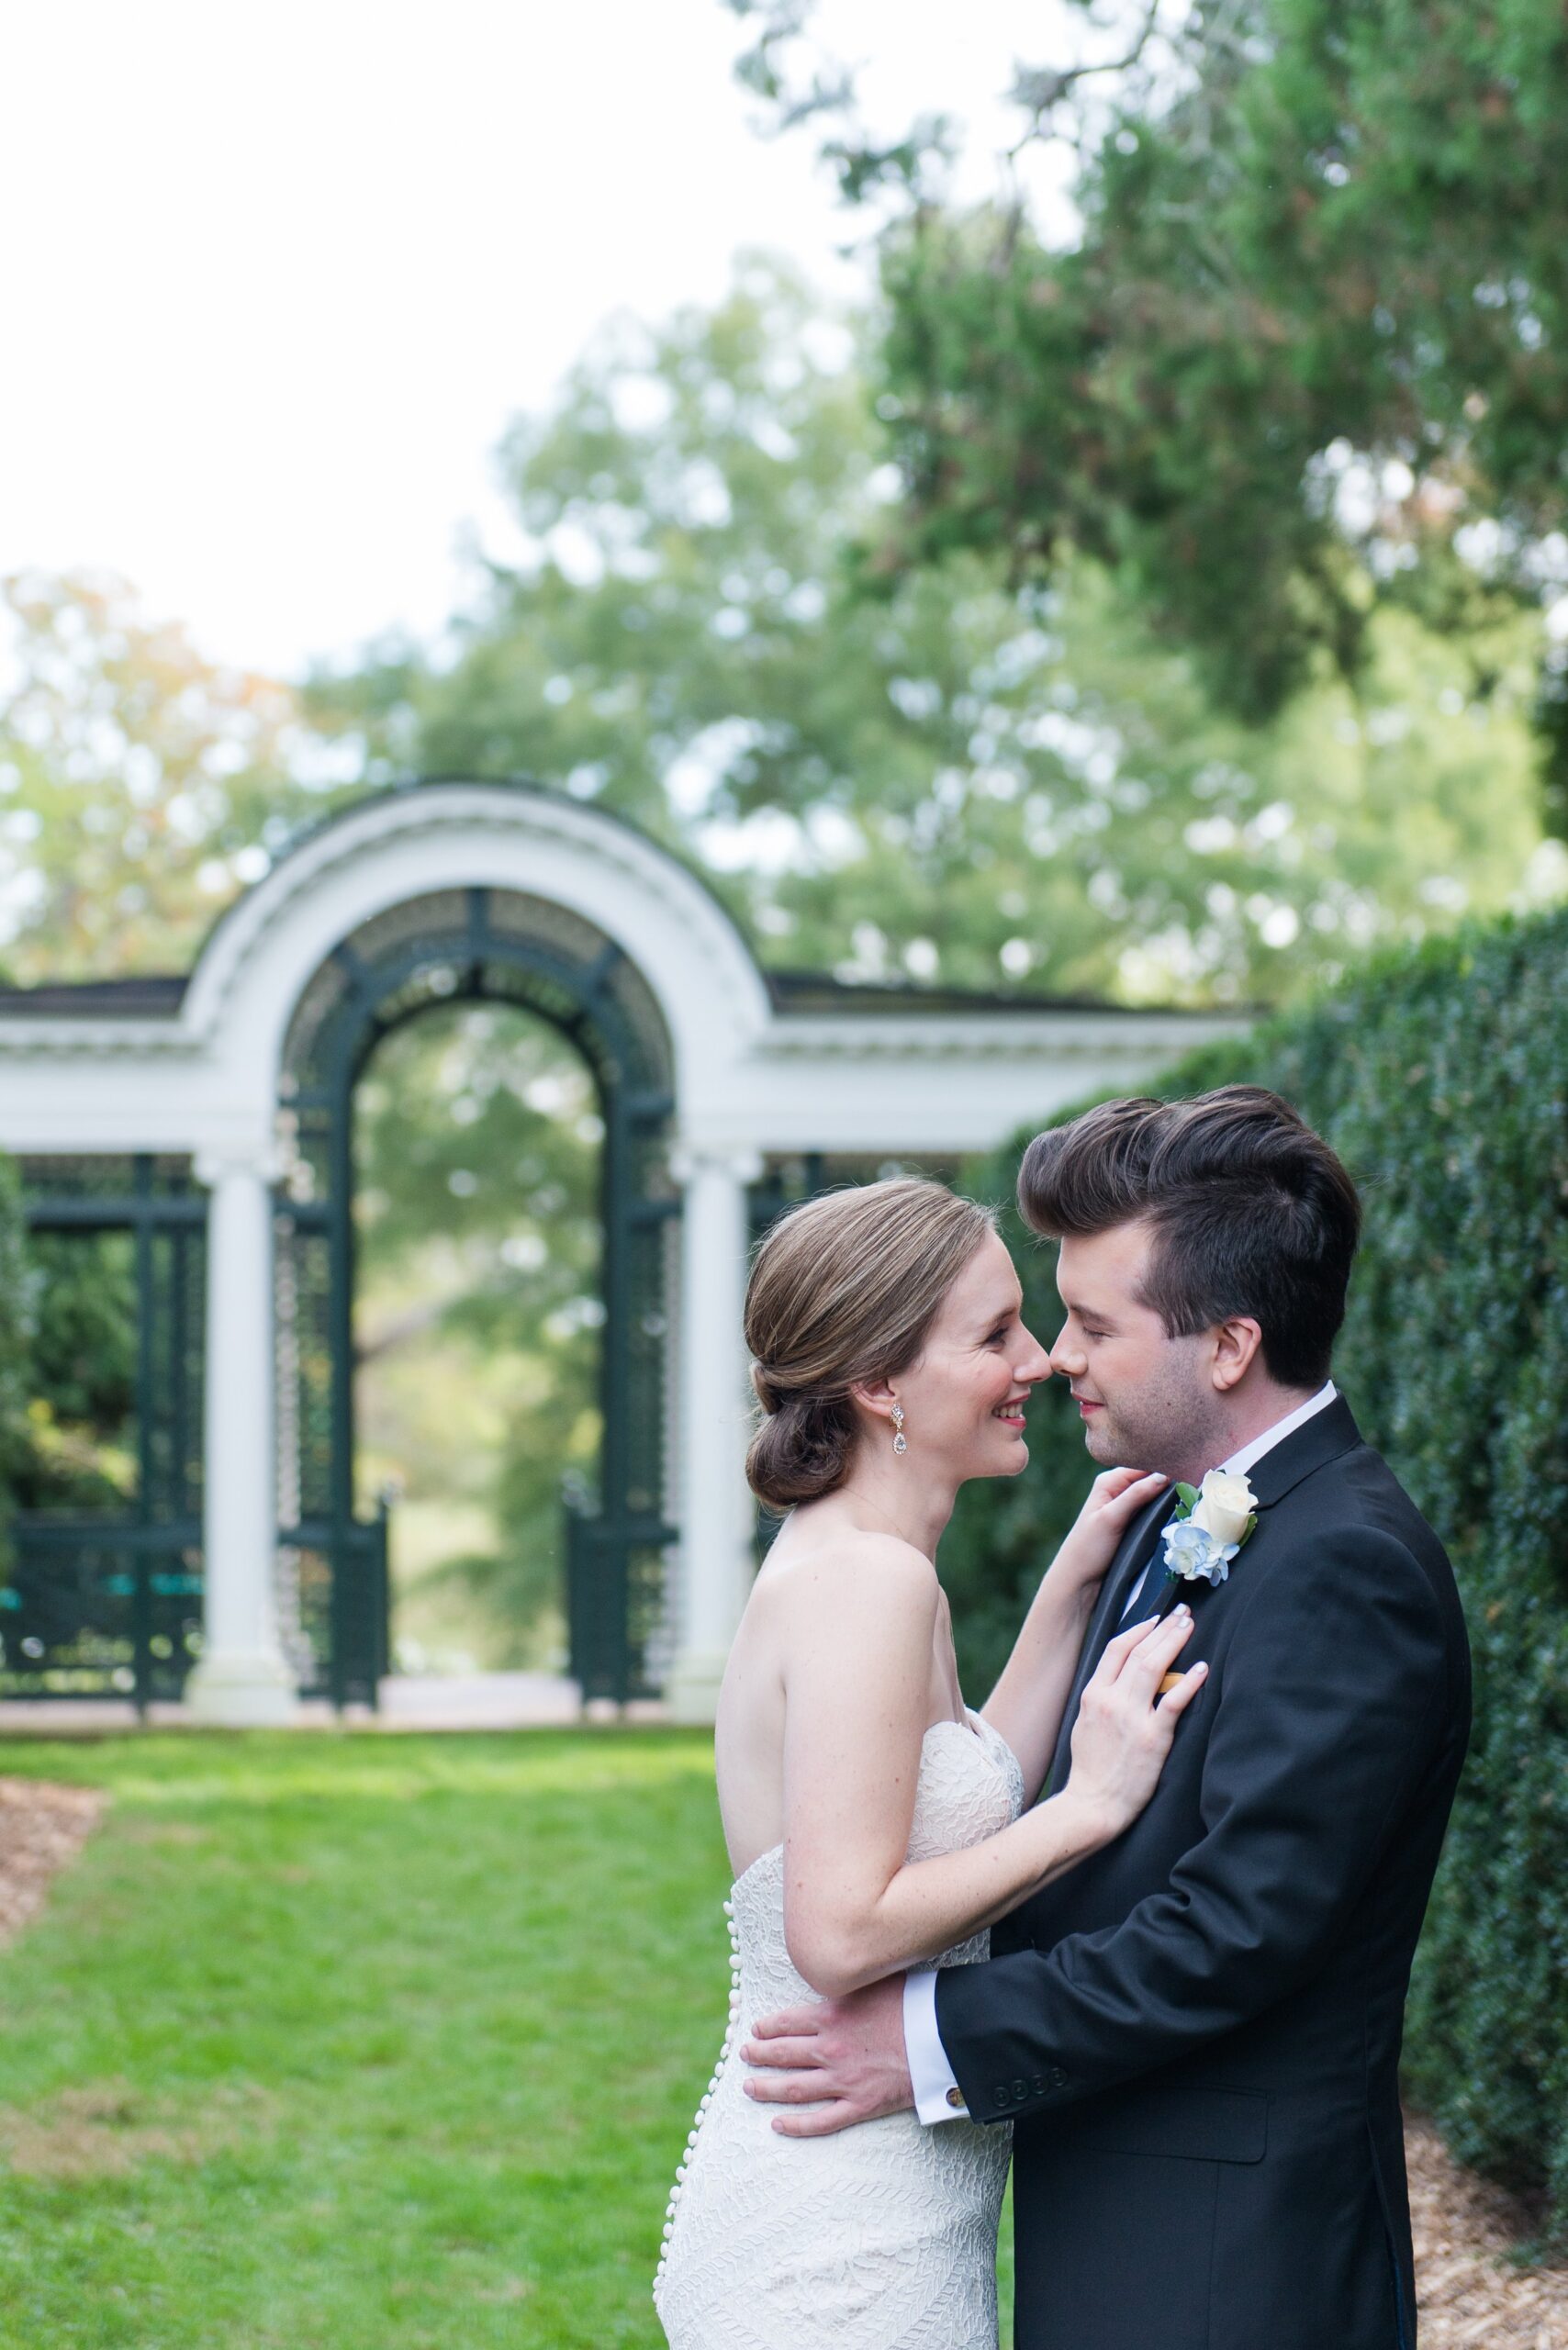 A bride and groom smiling at each other in a romantic garden before their wedding at Oatlands Historic House and Gardens in Loudoun County Virginia